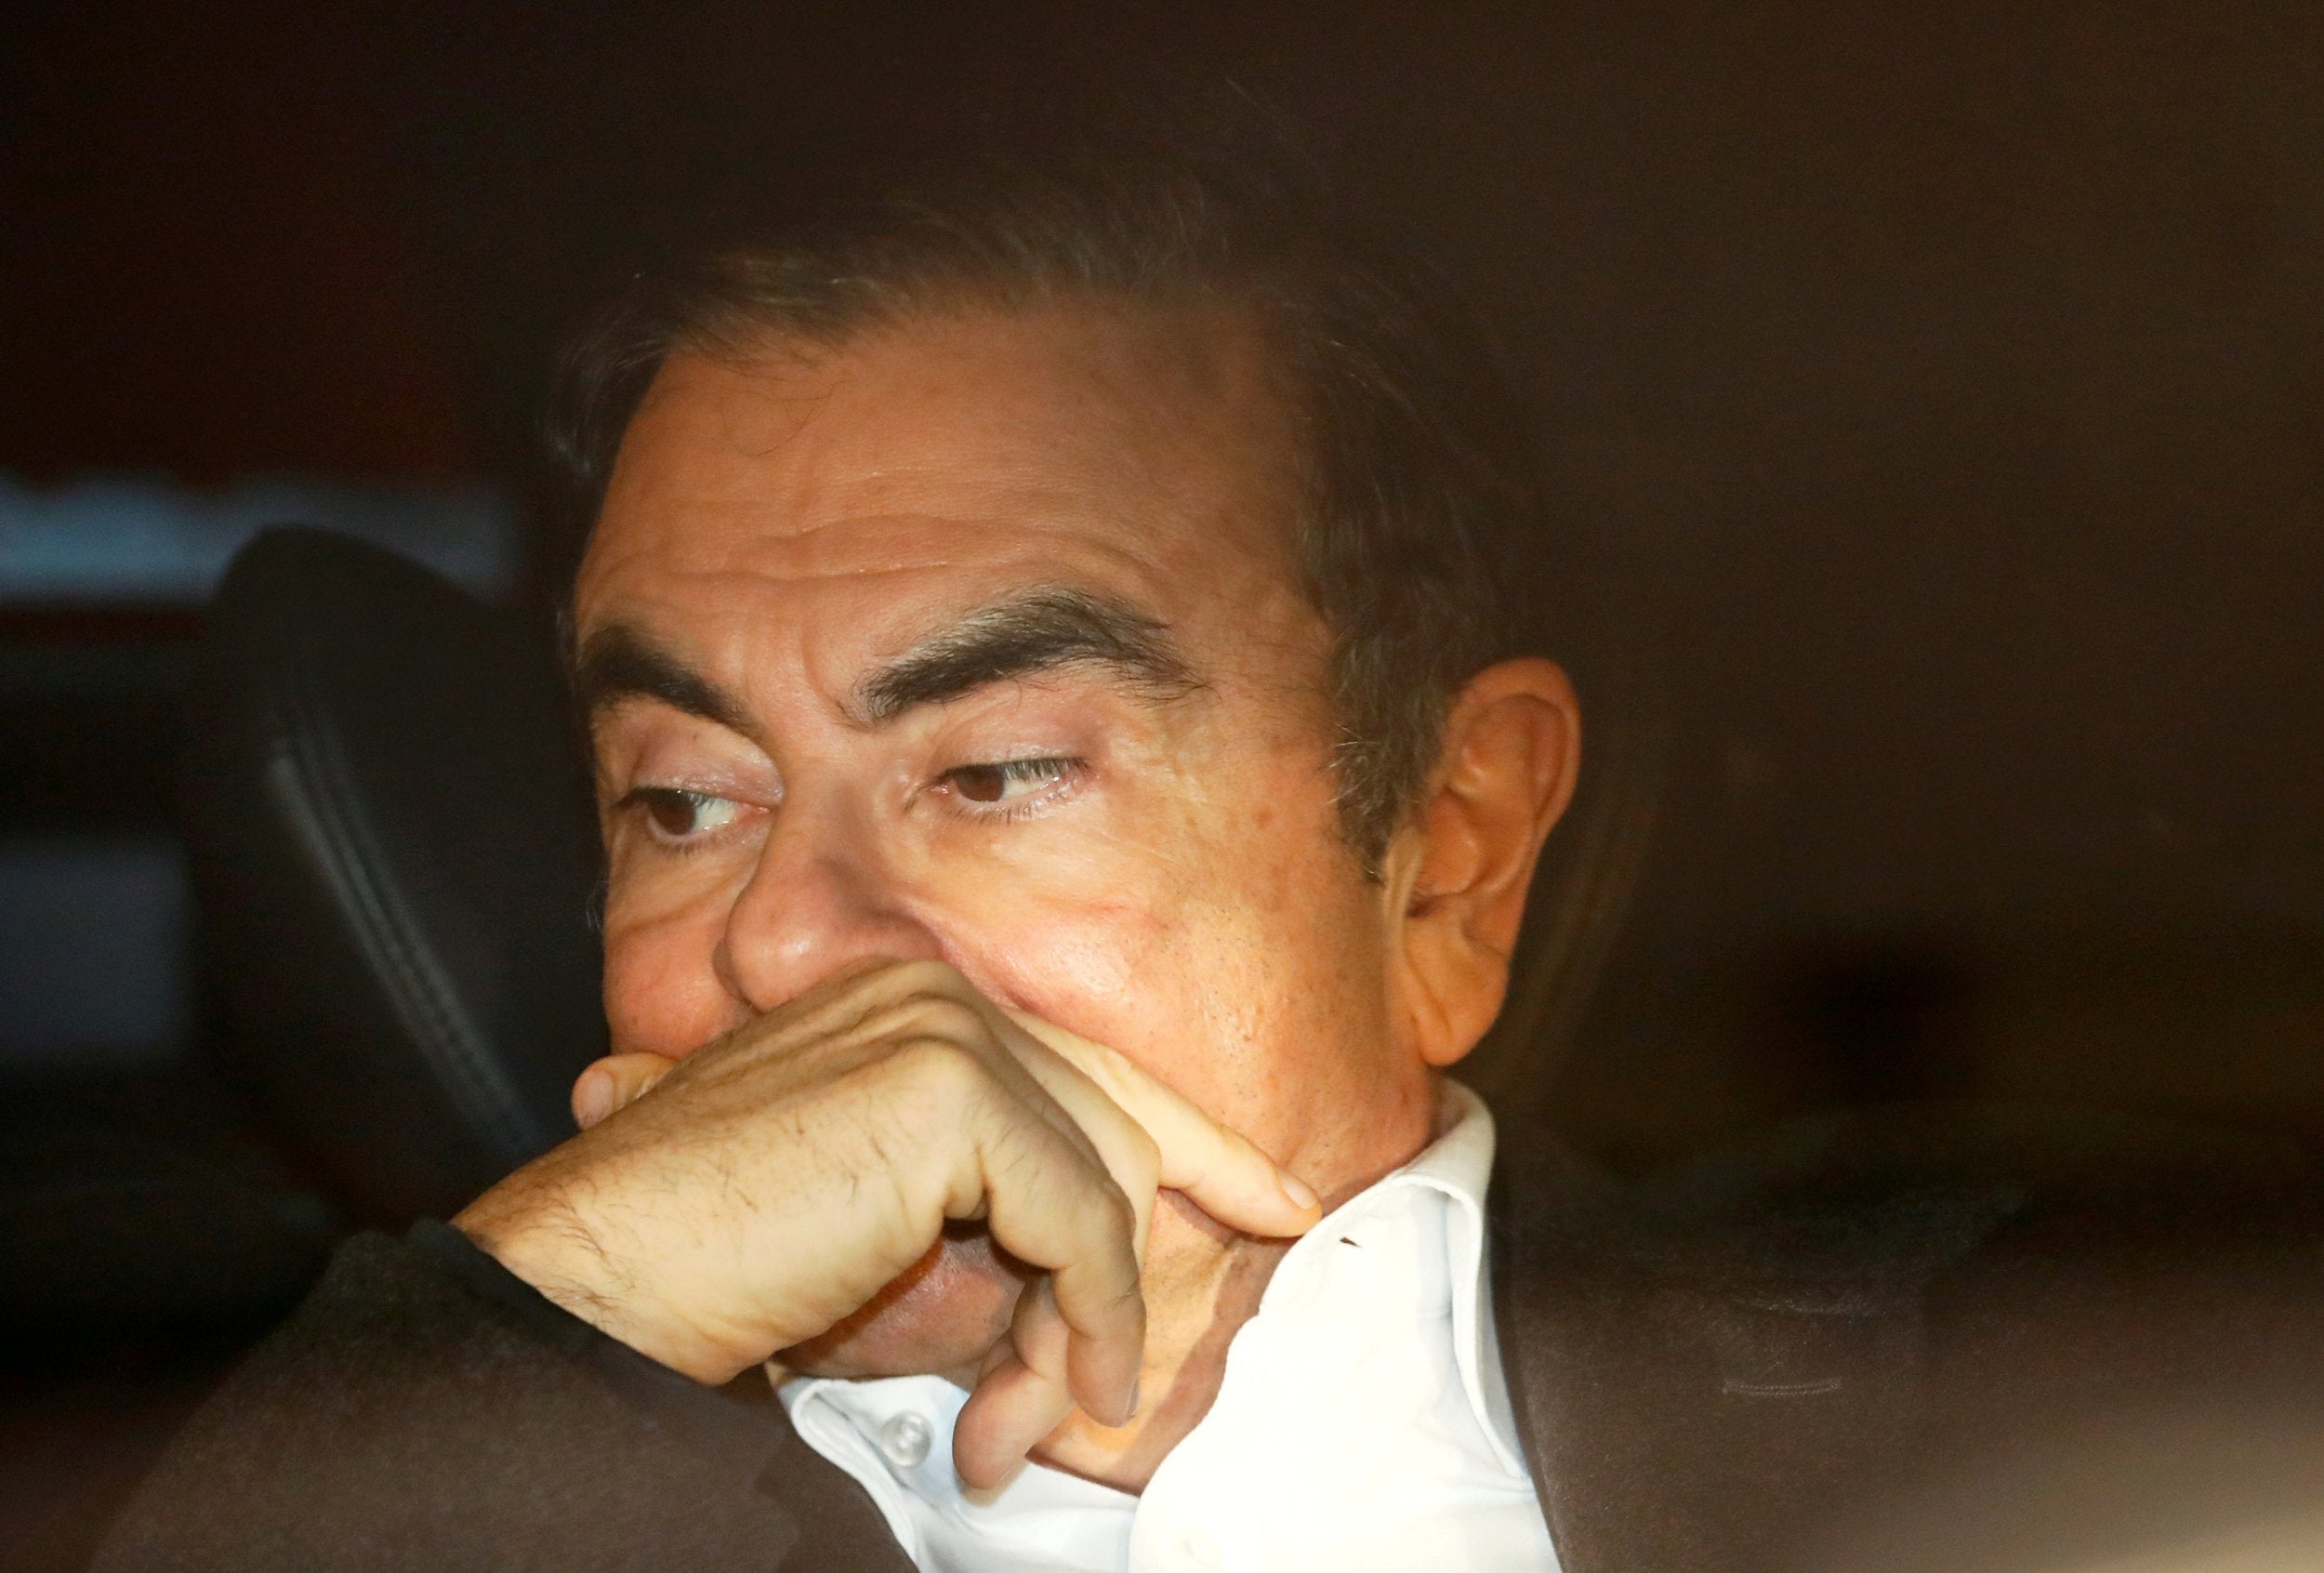 Carlos Ghosn after being released on bail for the first time in Tokyo on 6 March 2019